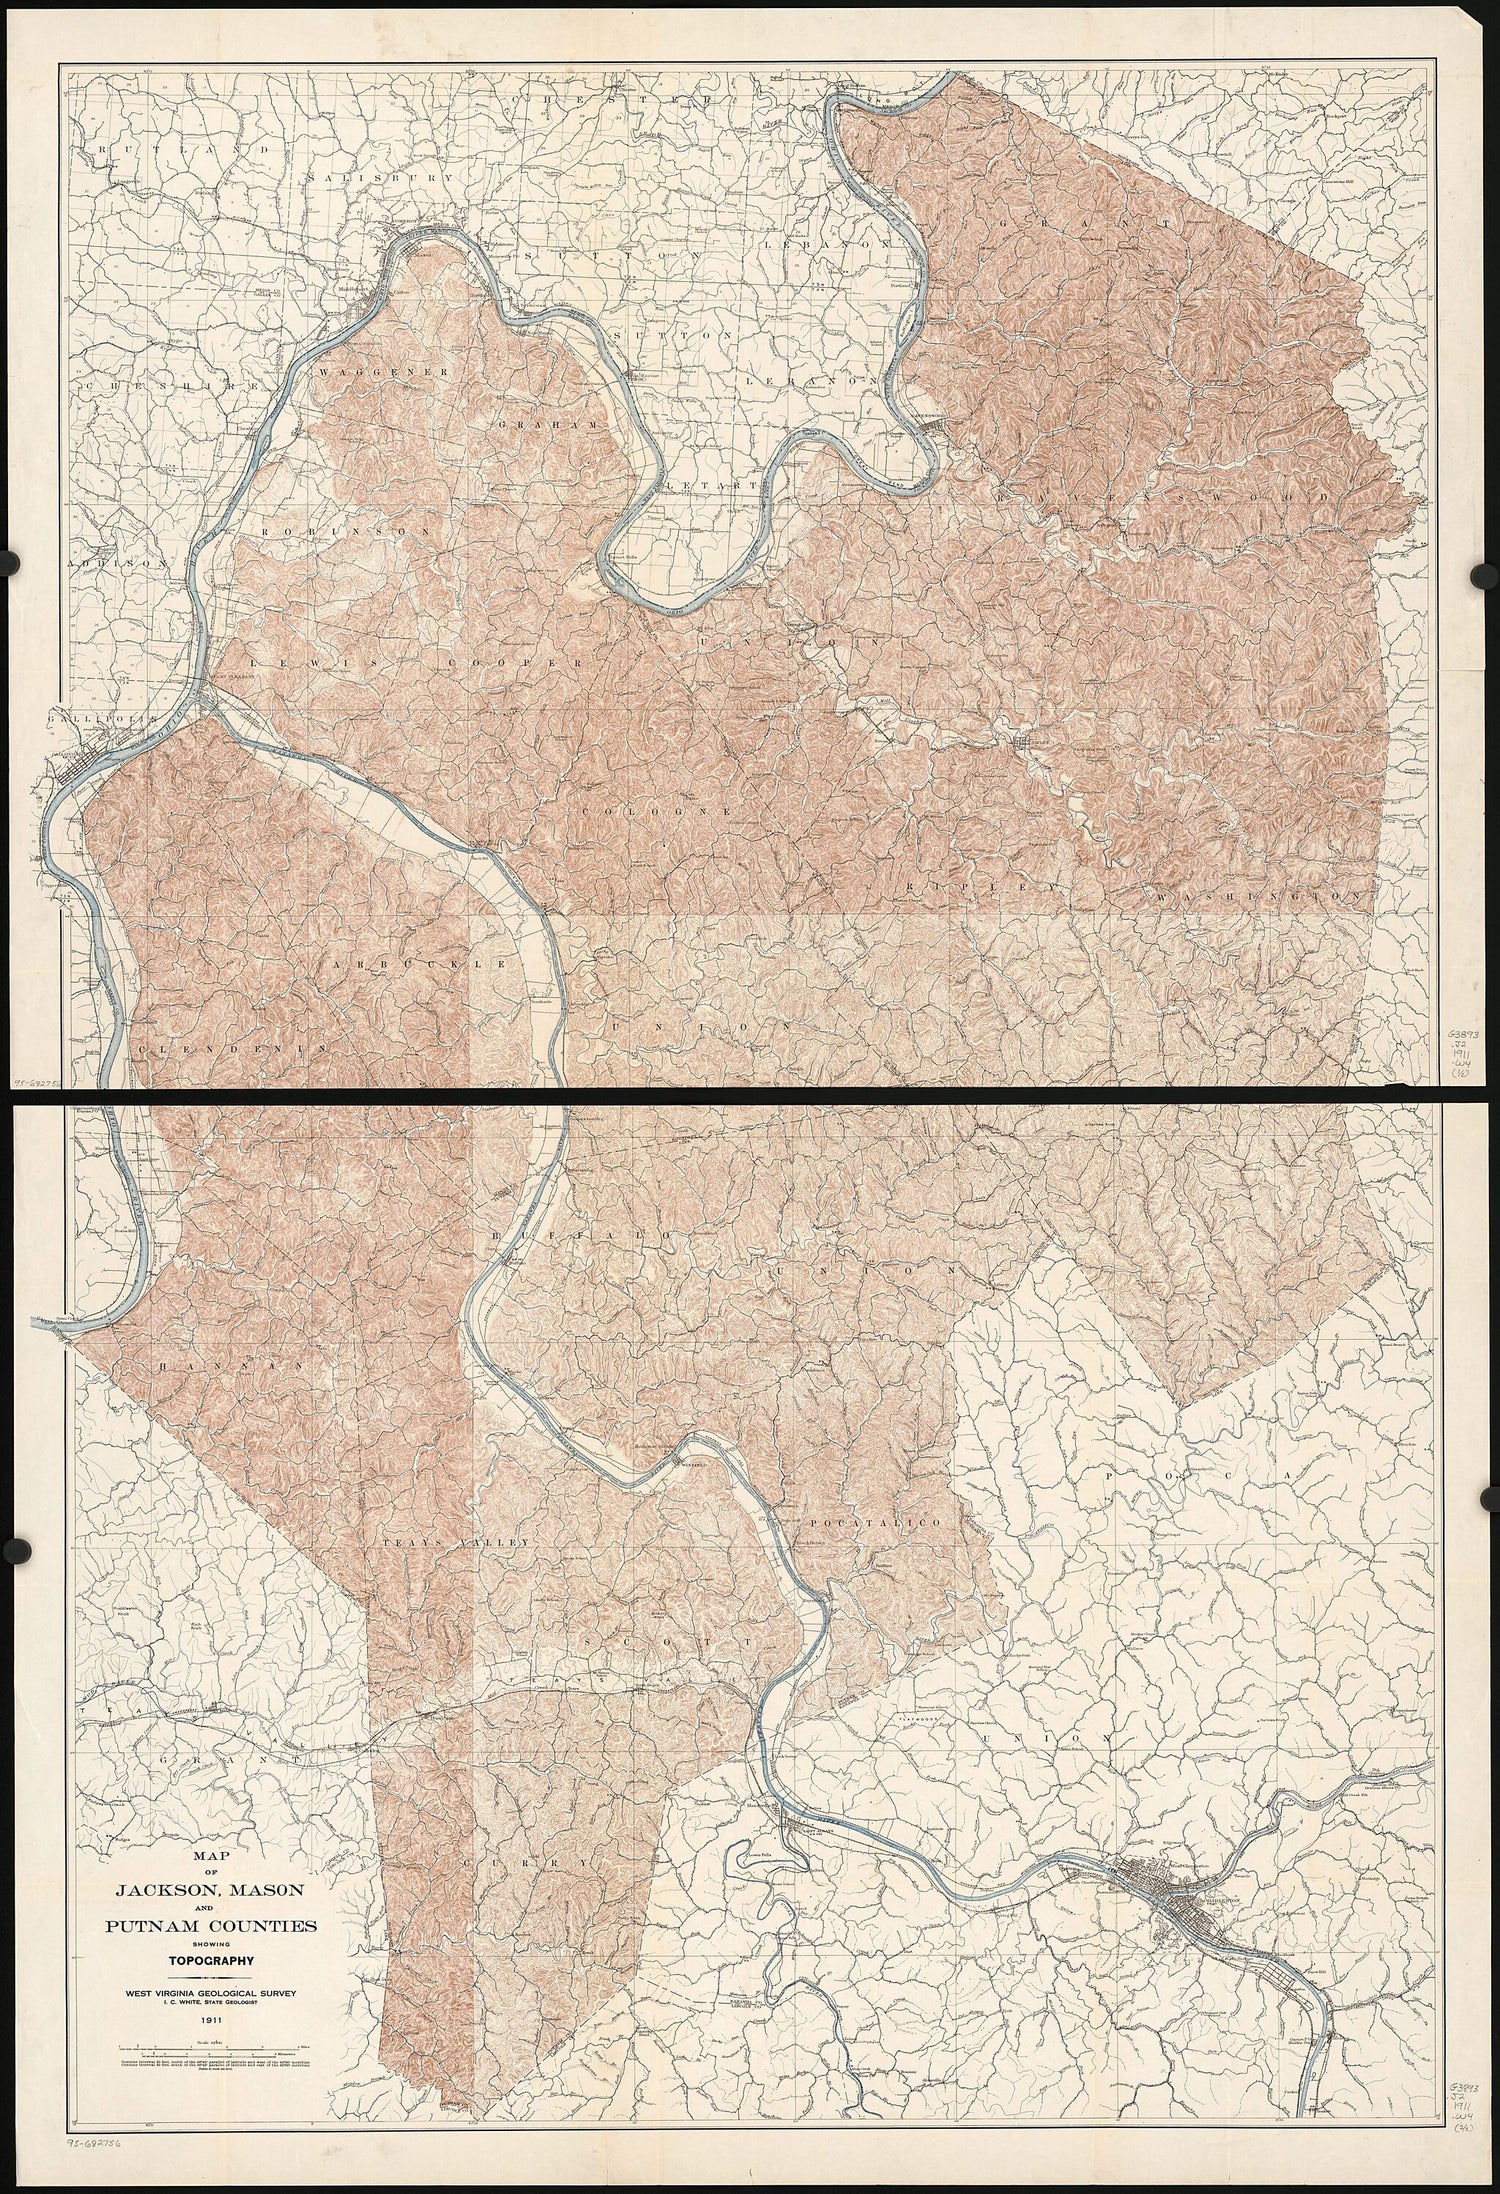 This old map of Map of Jackson, Mason, and Putnam Counties Showing Topography from 1911 was created by  West Virginia Geological and Economic Survey, I. C. (Israel Charles) White in 1911